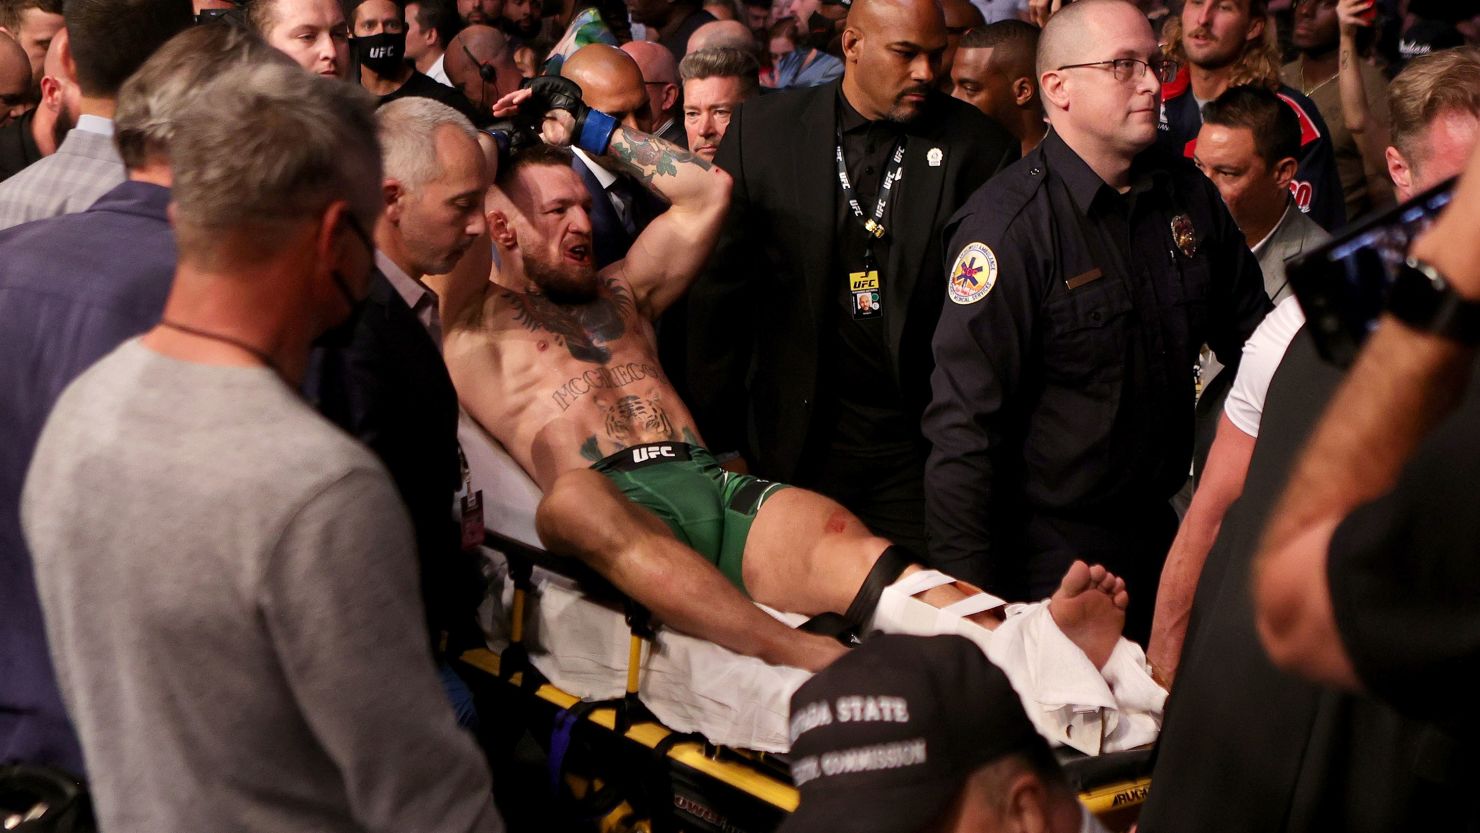 McGregor is carried out of the arena on a stretcher after injuring his ankle in the first round of his lightweight bout against Poirier.